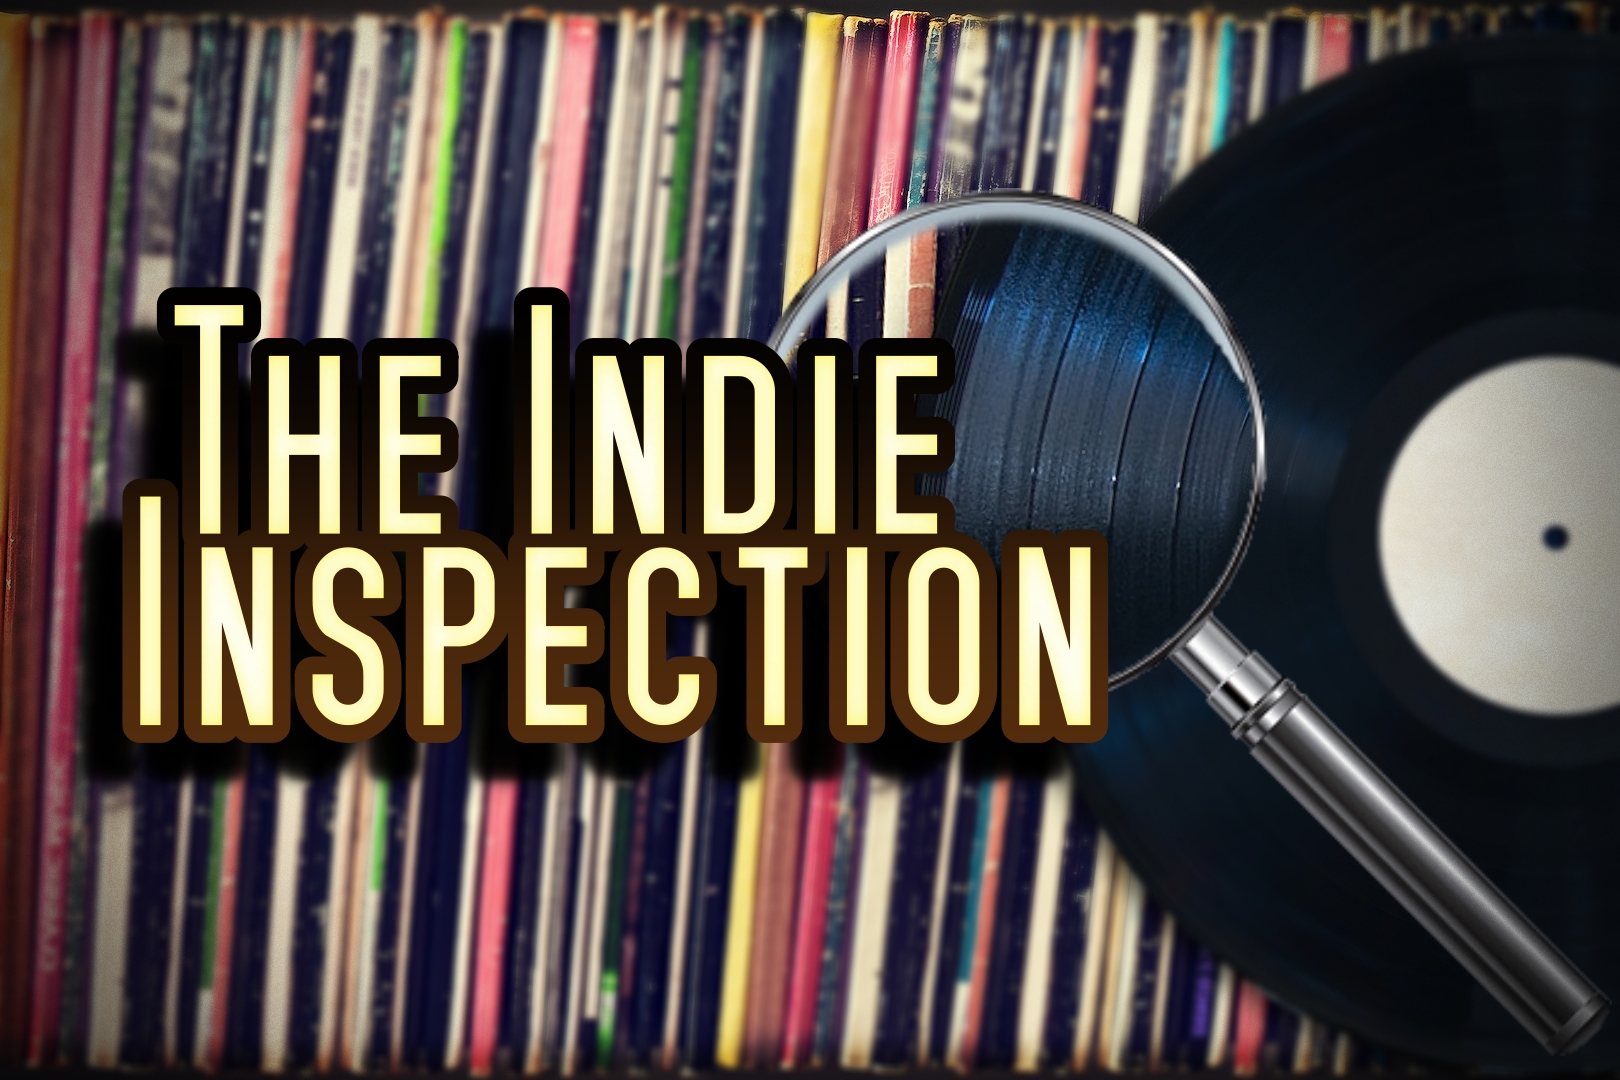 The Indie Inspection